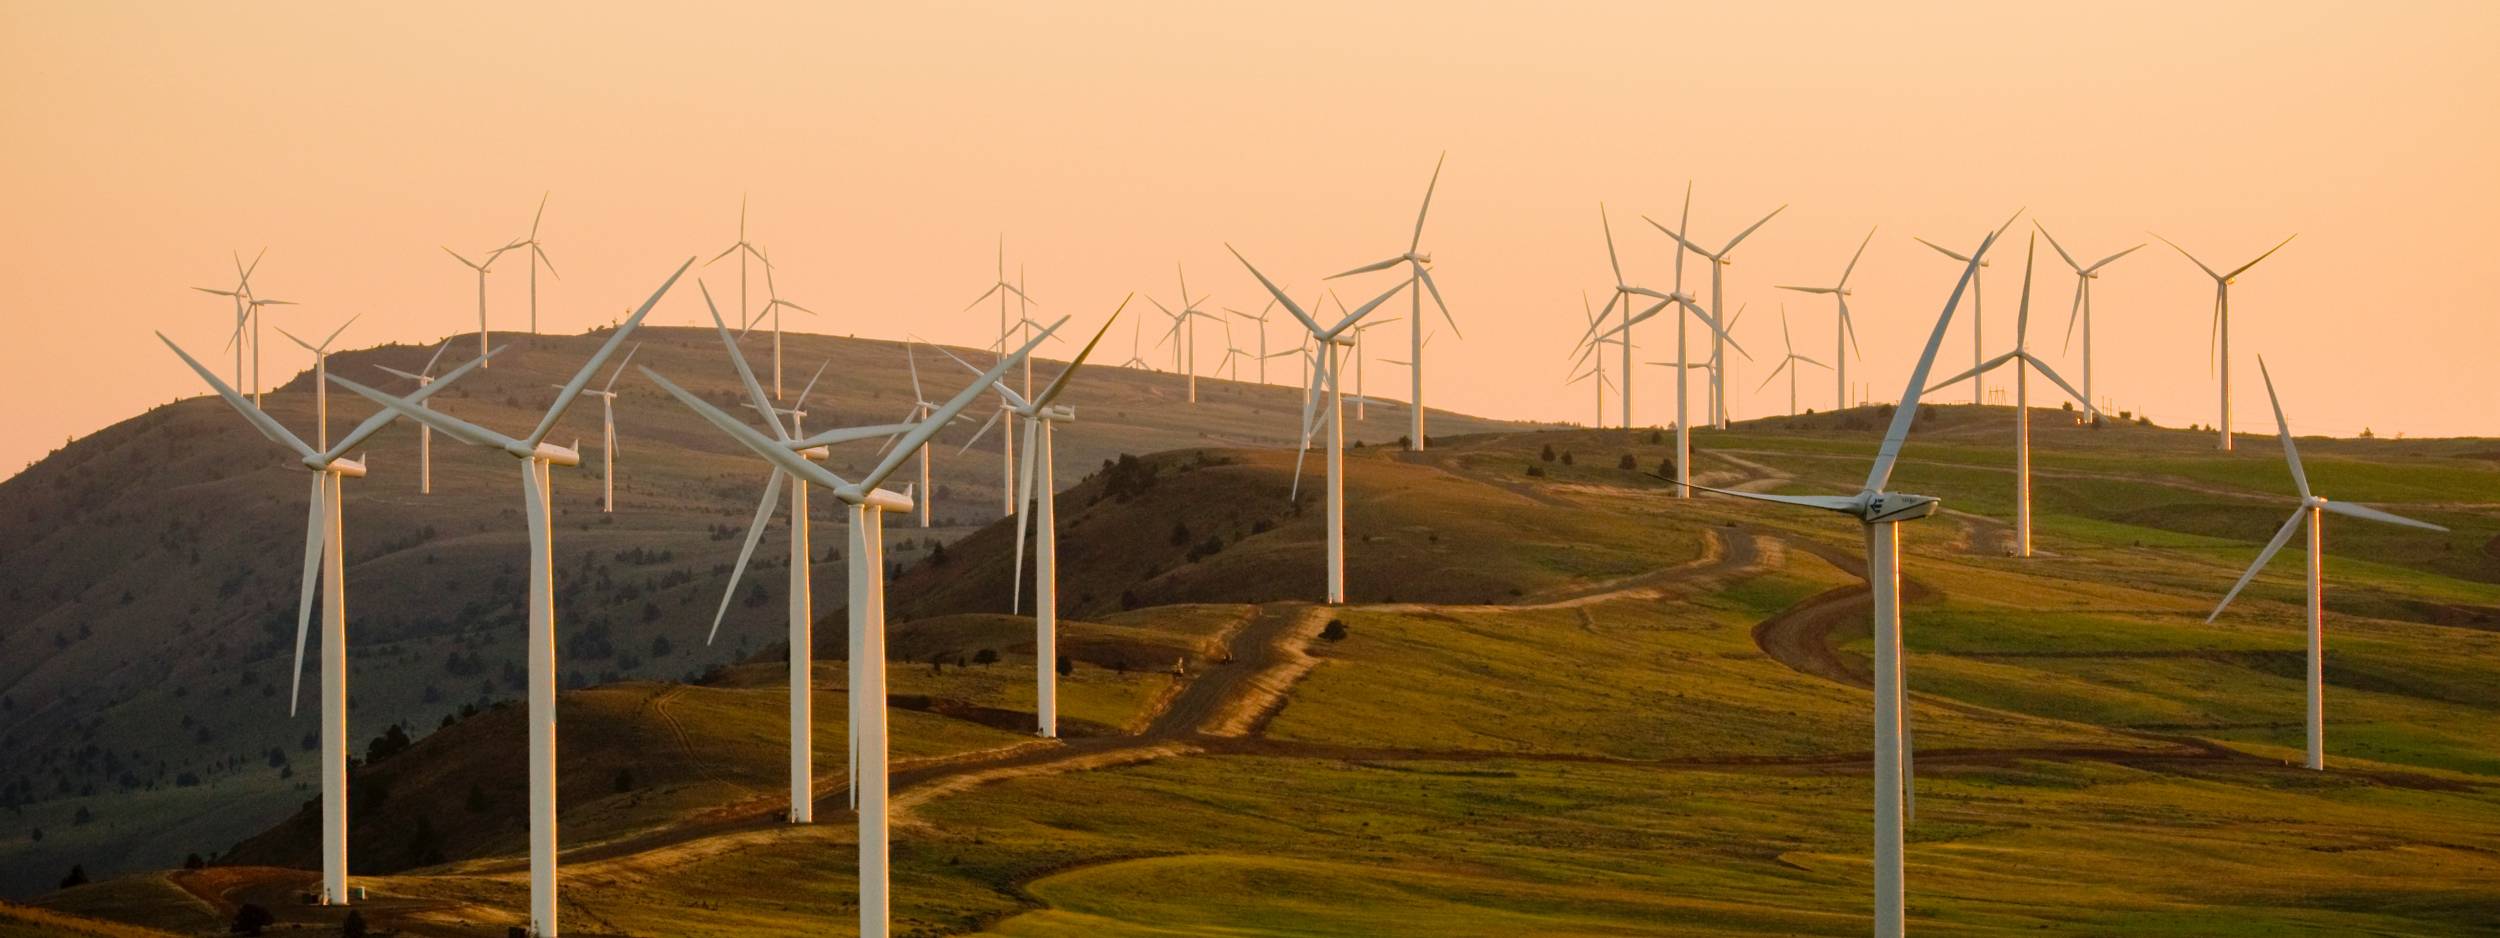 A SMART way to enhance the generation capabilities wind power plants. - The Energy Coop